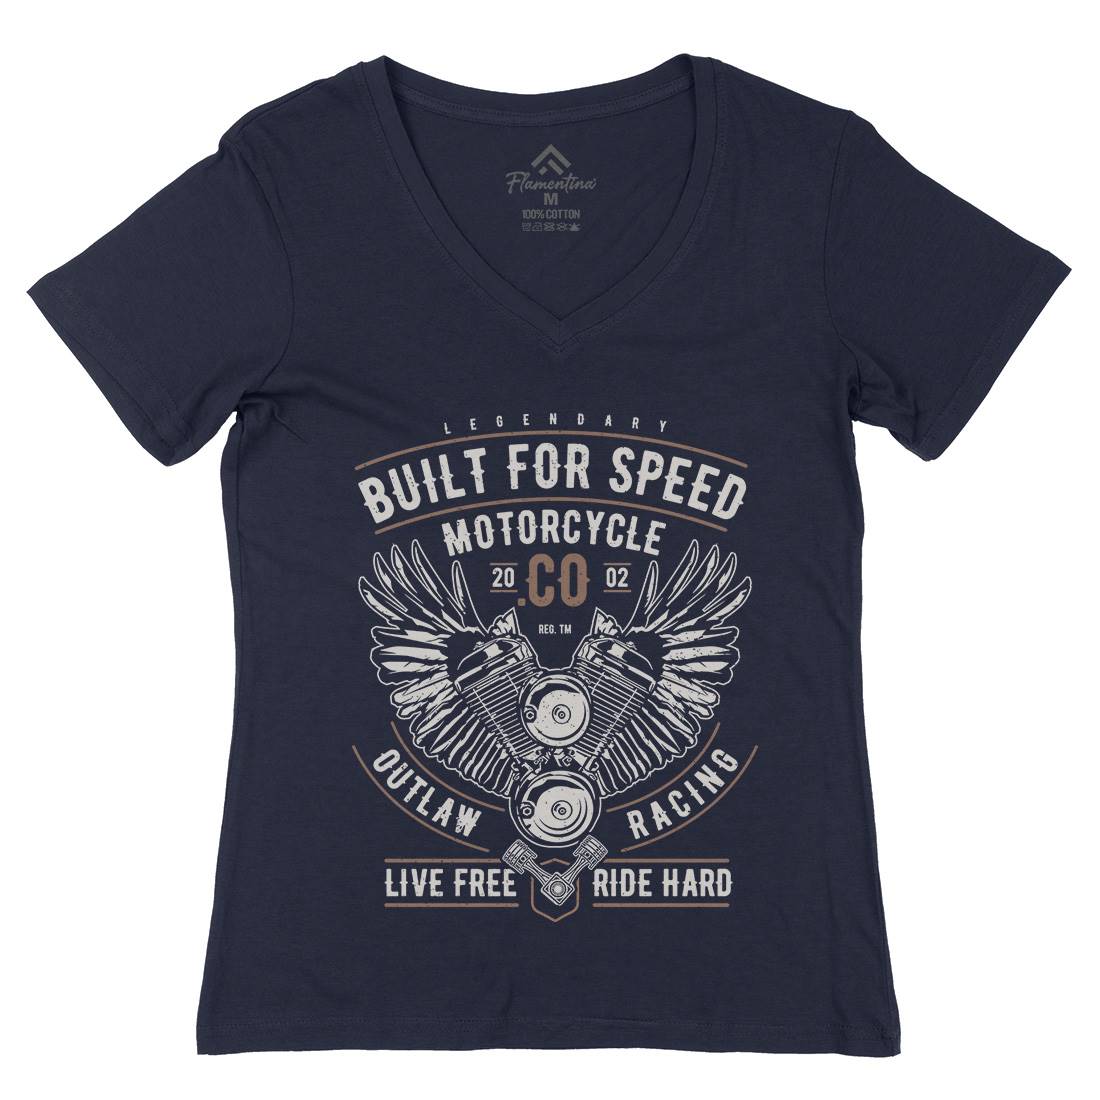 Built For Speed Womens Organic V-Neck T-Shirt Motorcycles A628